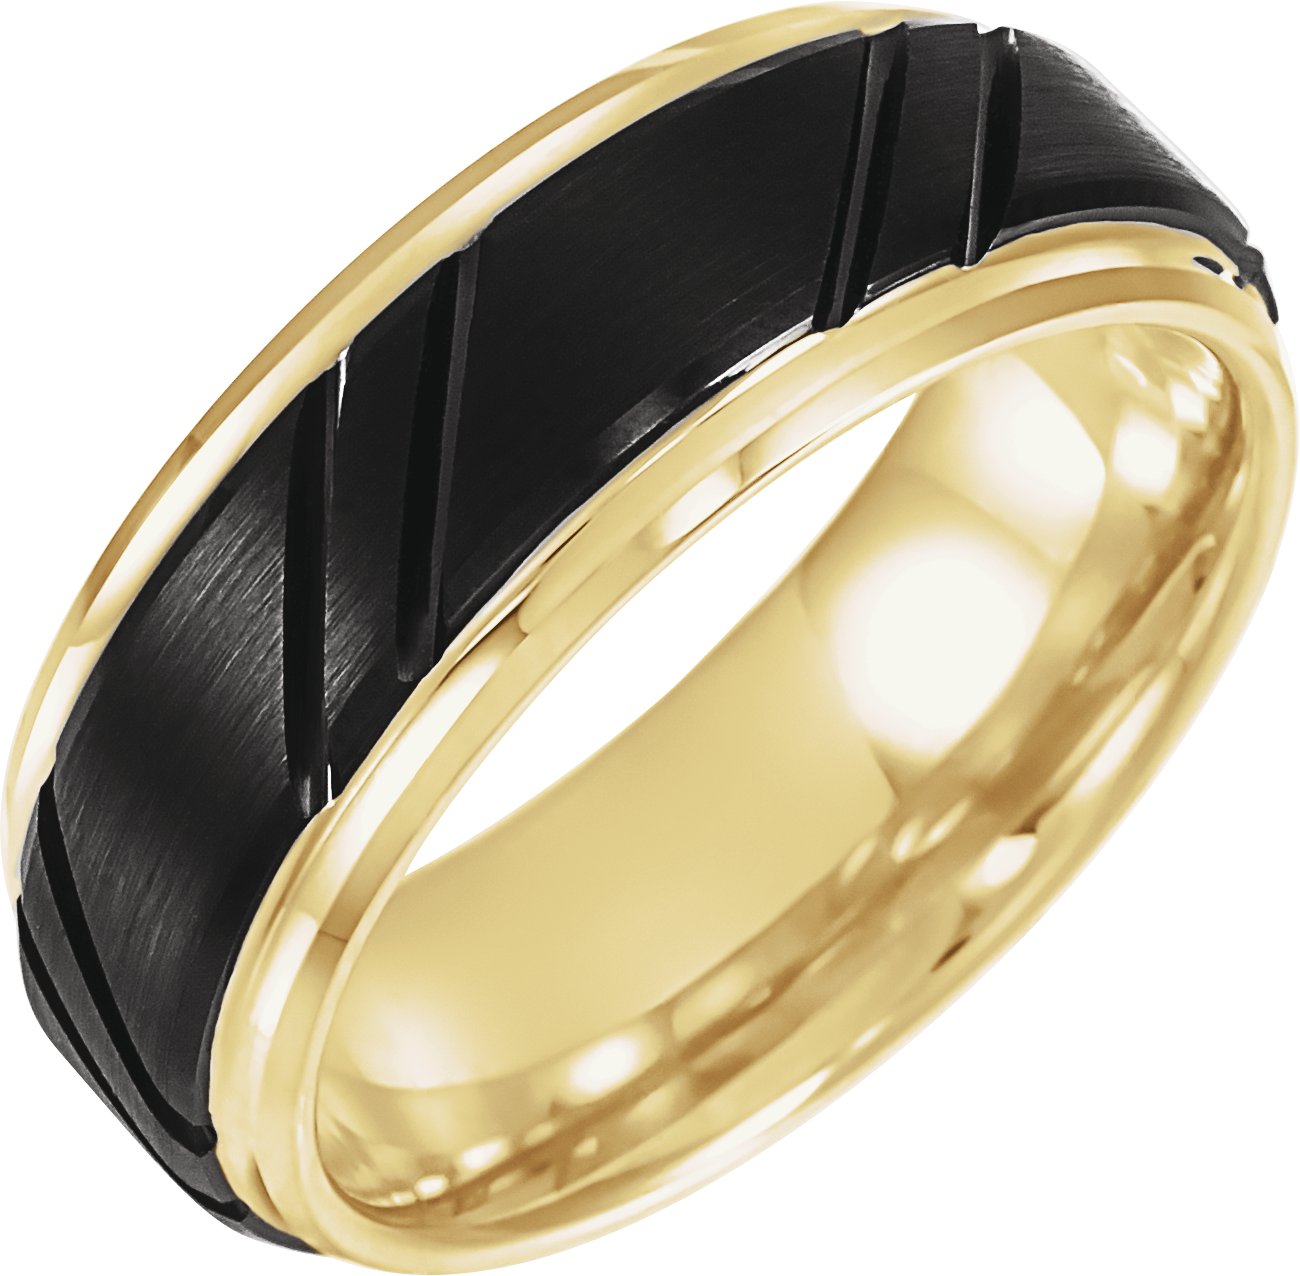 18K Yellow Gold-Plated & Black PVD Tungsten 8 mm Grooved Band Size 12